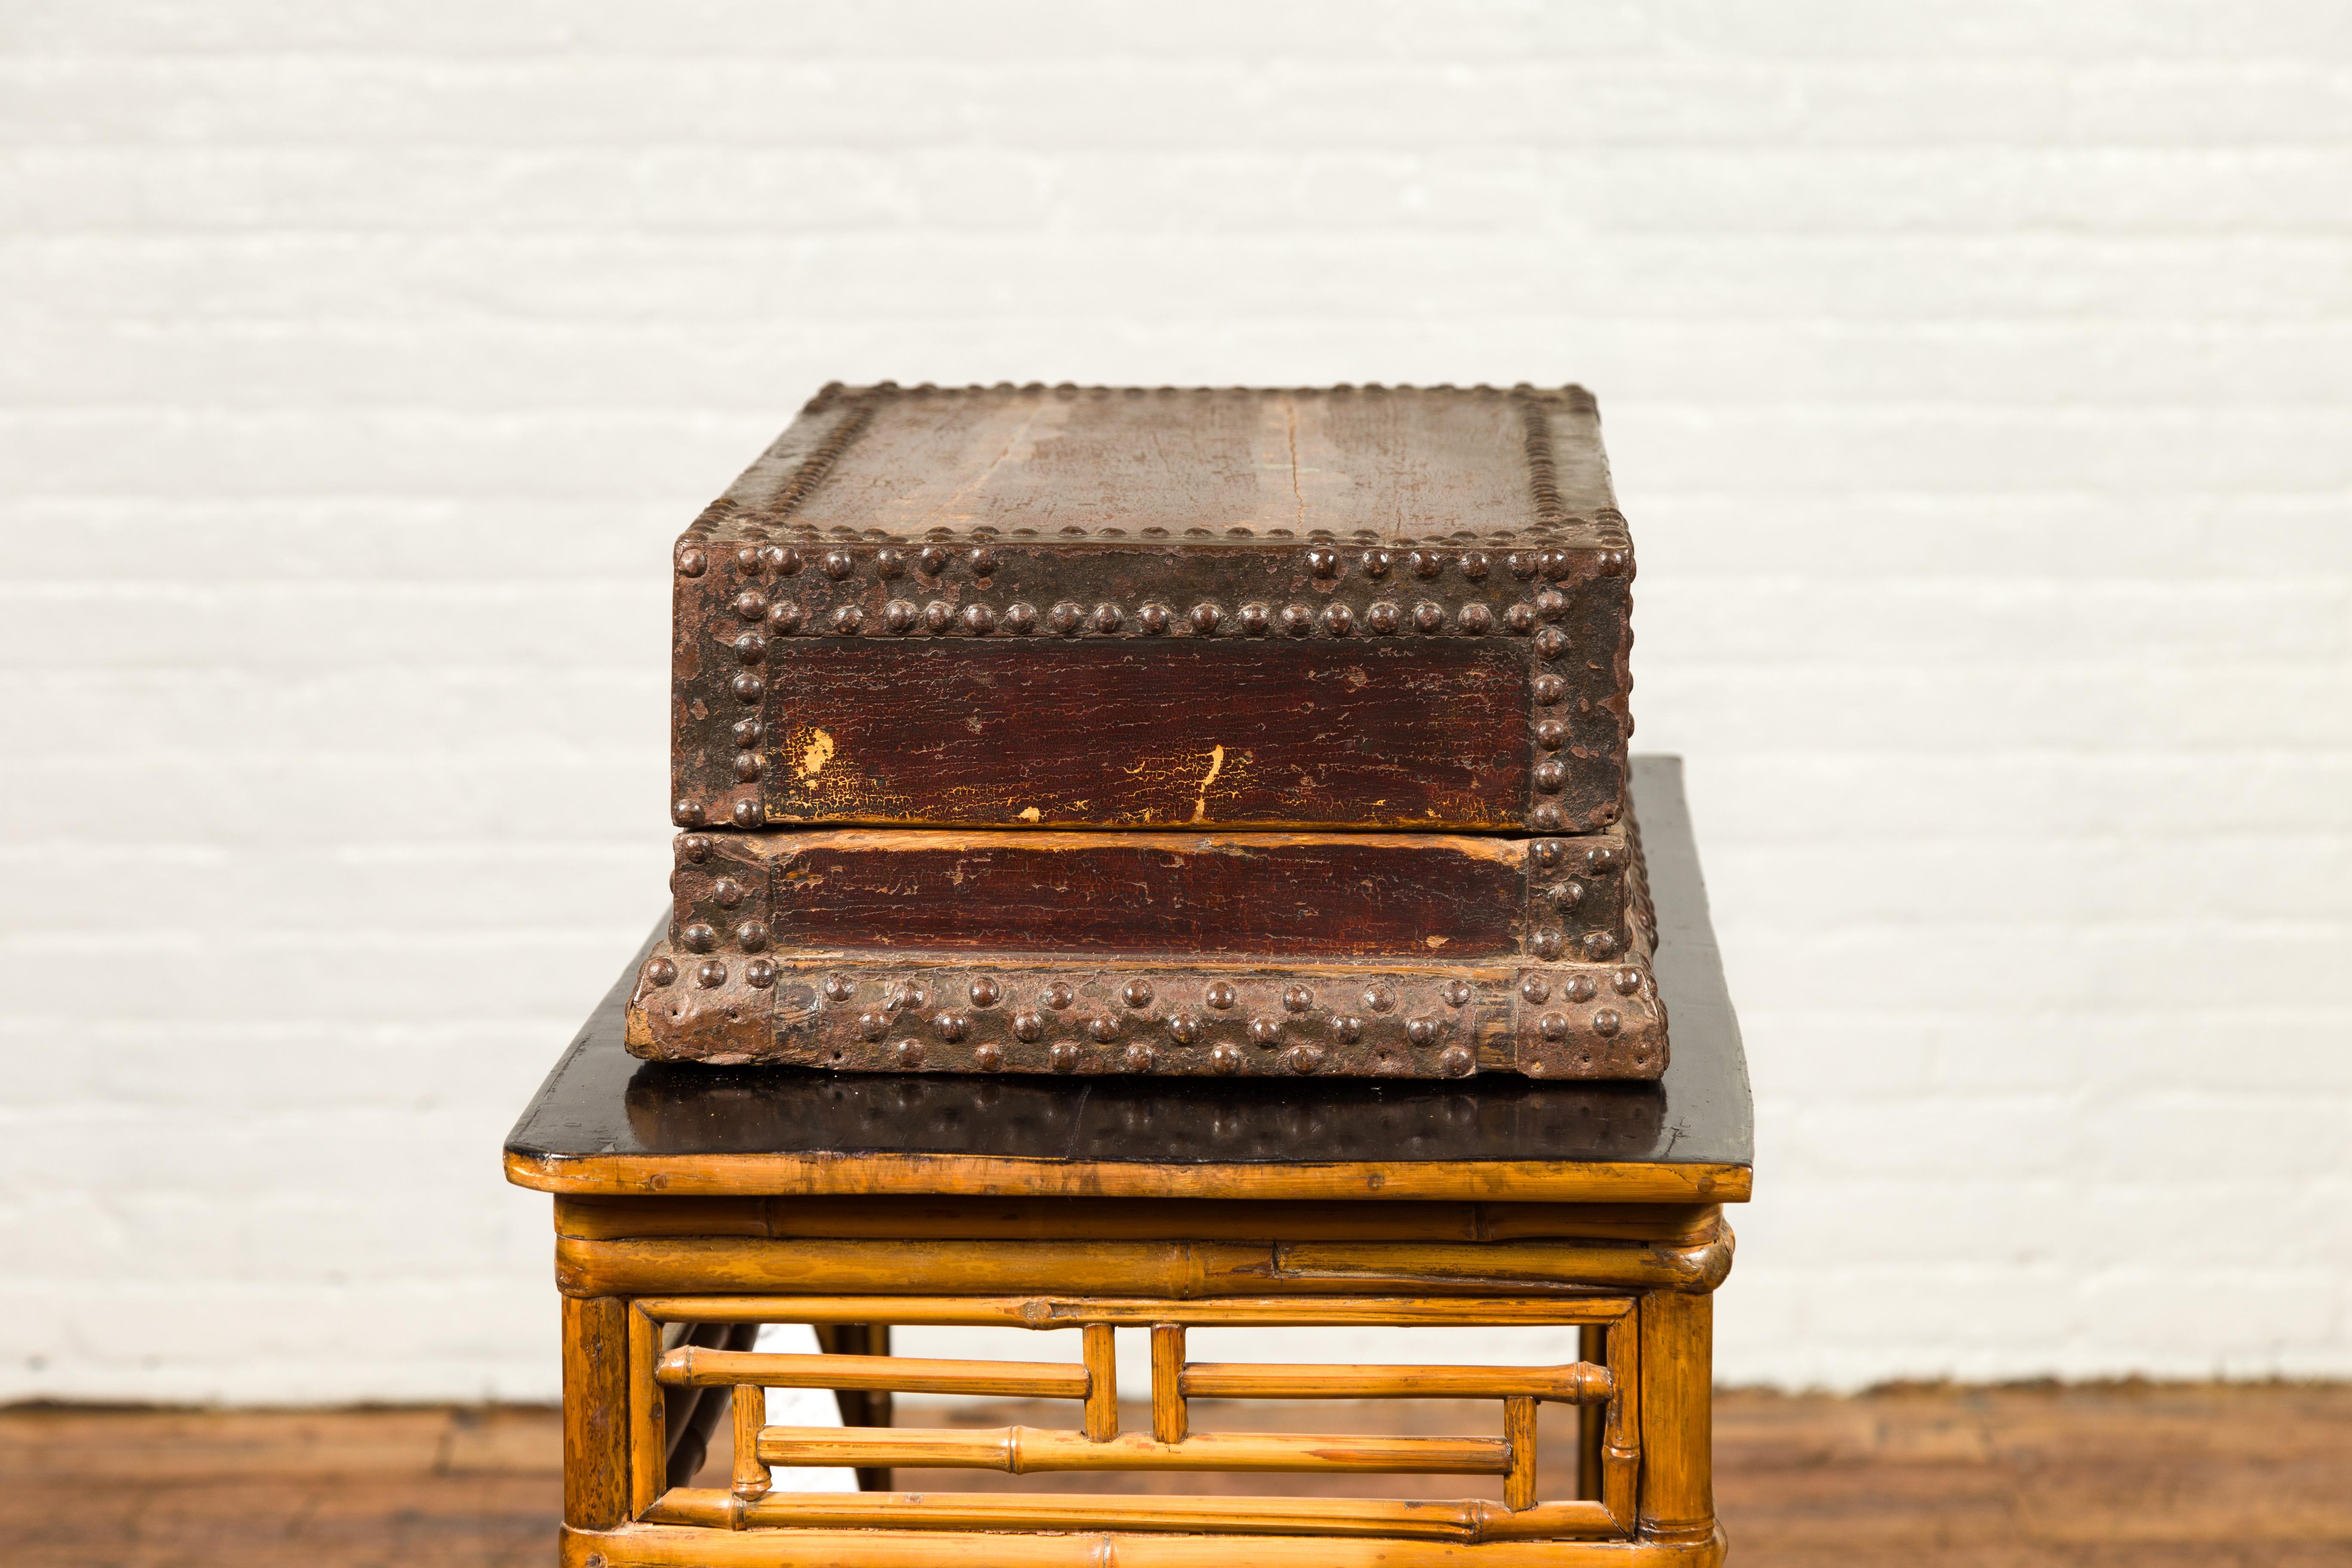 19th Century Wooden Document Box with Distressed Patina and Brass Stud Design In Good Condition For Sale In Yonkers, NY